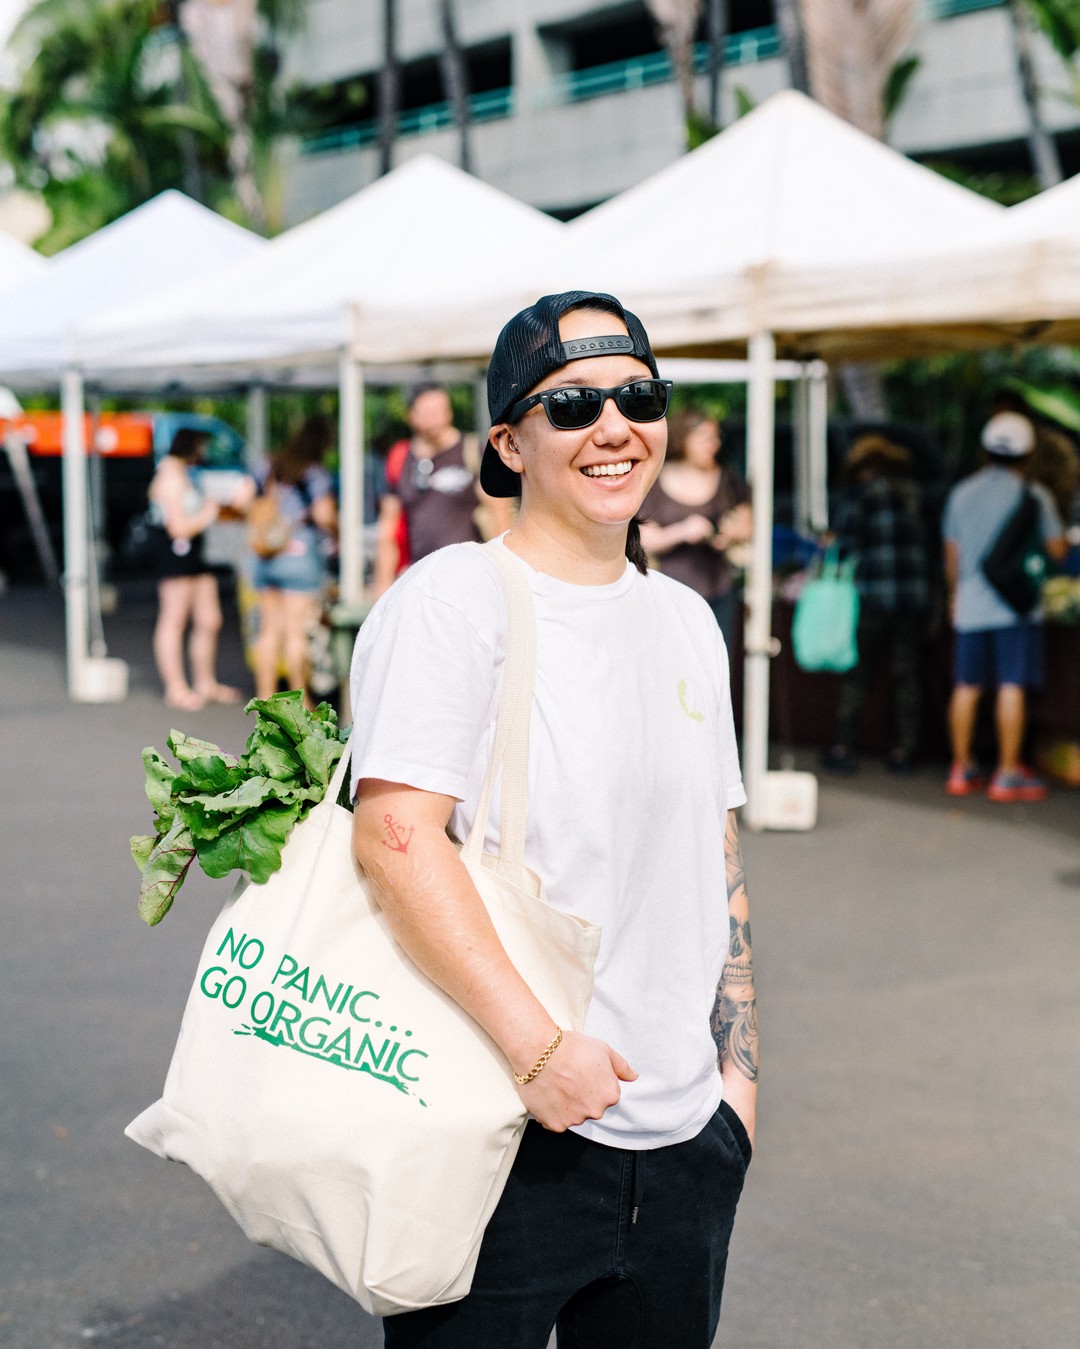 "I love the fact that I’m able to build real relationships with the people that grow this island’s food." -Jennifer Chow, head chef at Nobu. Discover what make's the Kakaako Farmer's Market so special to one of Honolulu's top chefs. 🥬 Link in bio.